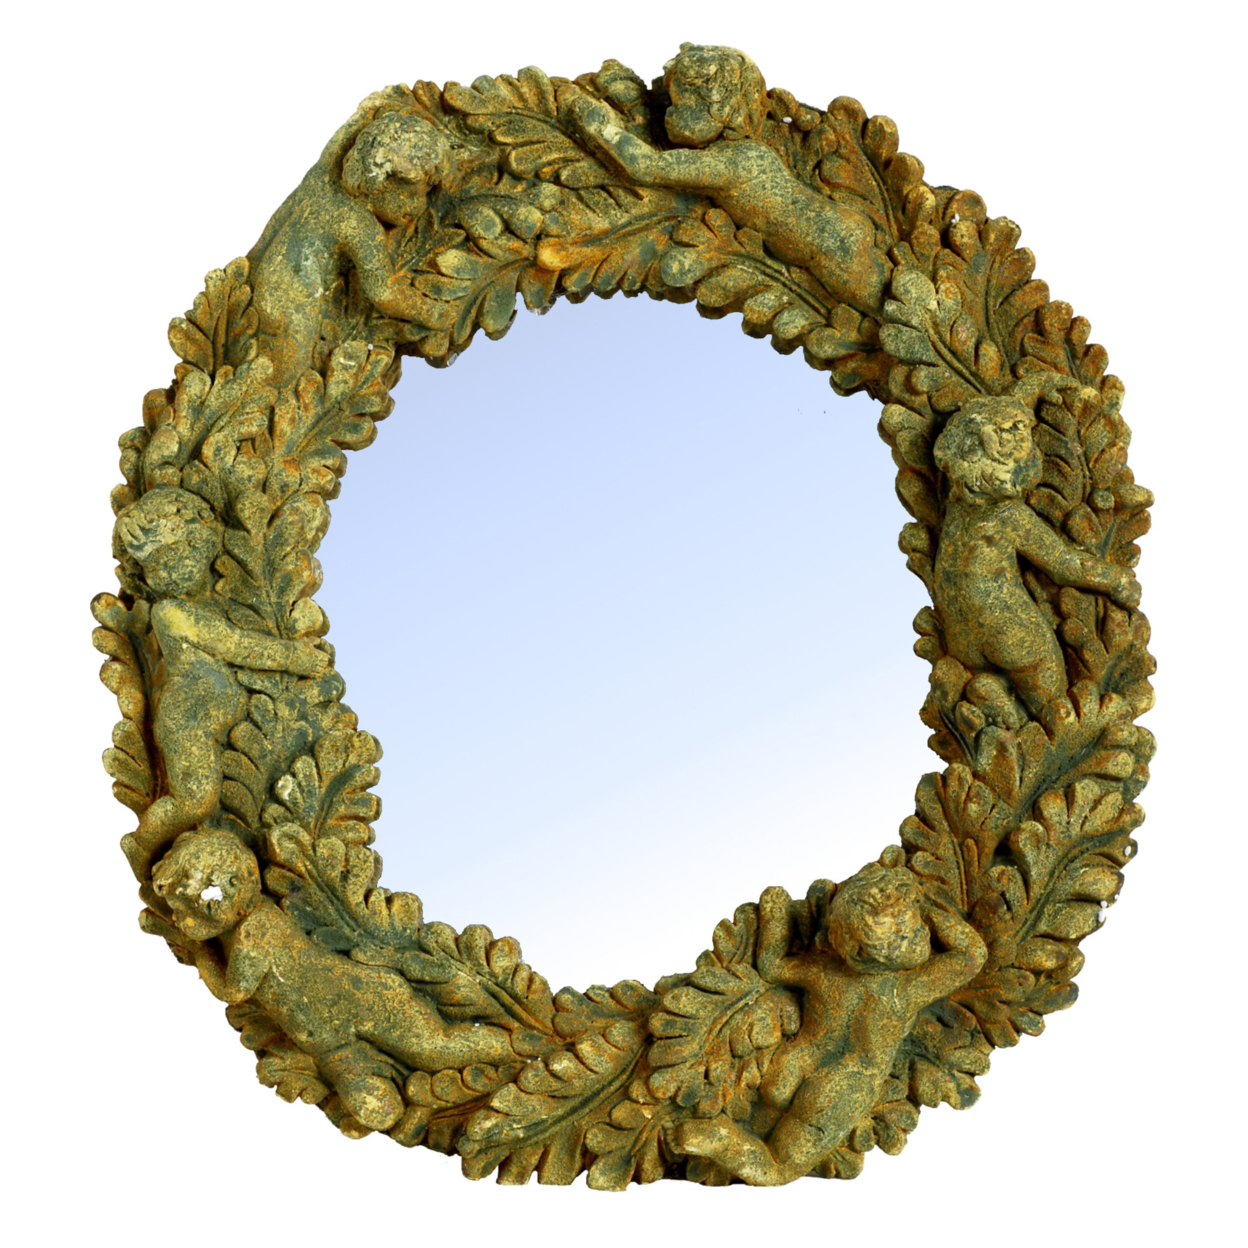 Round Wall Decorative Mirror With Thick Cemented Border, Rustic Green- Saltoro Sherpi